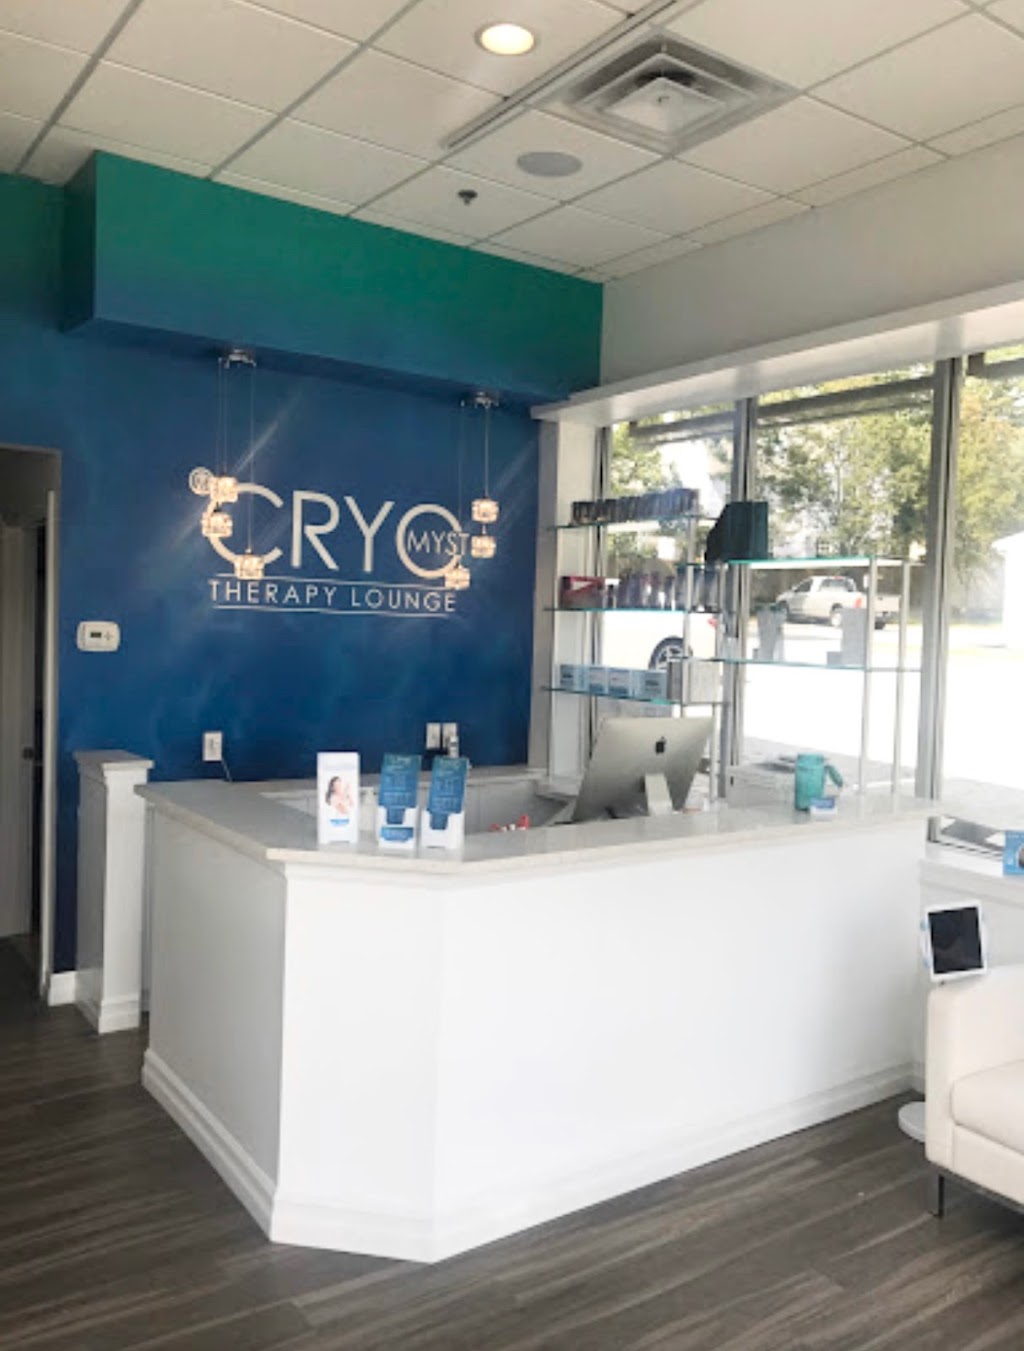 Cryo Myst Therapy Lounge | 510 Lancaster Ave, Haverford, PA 19041, USA | Phone: (484) 380-2083